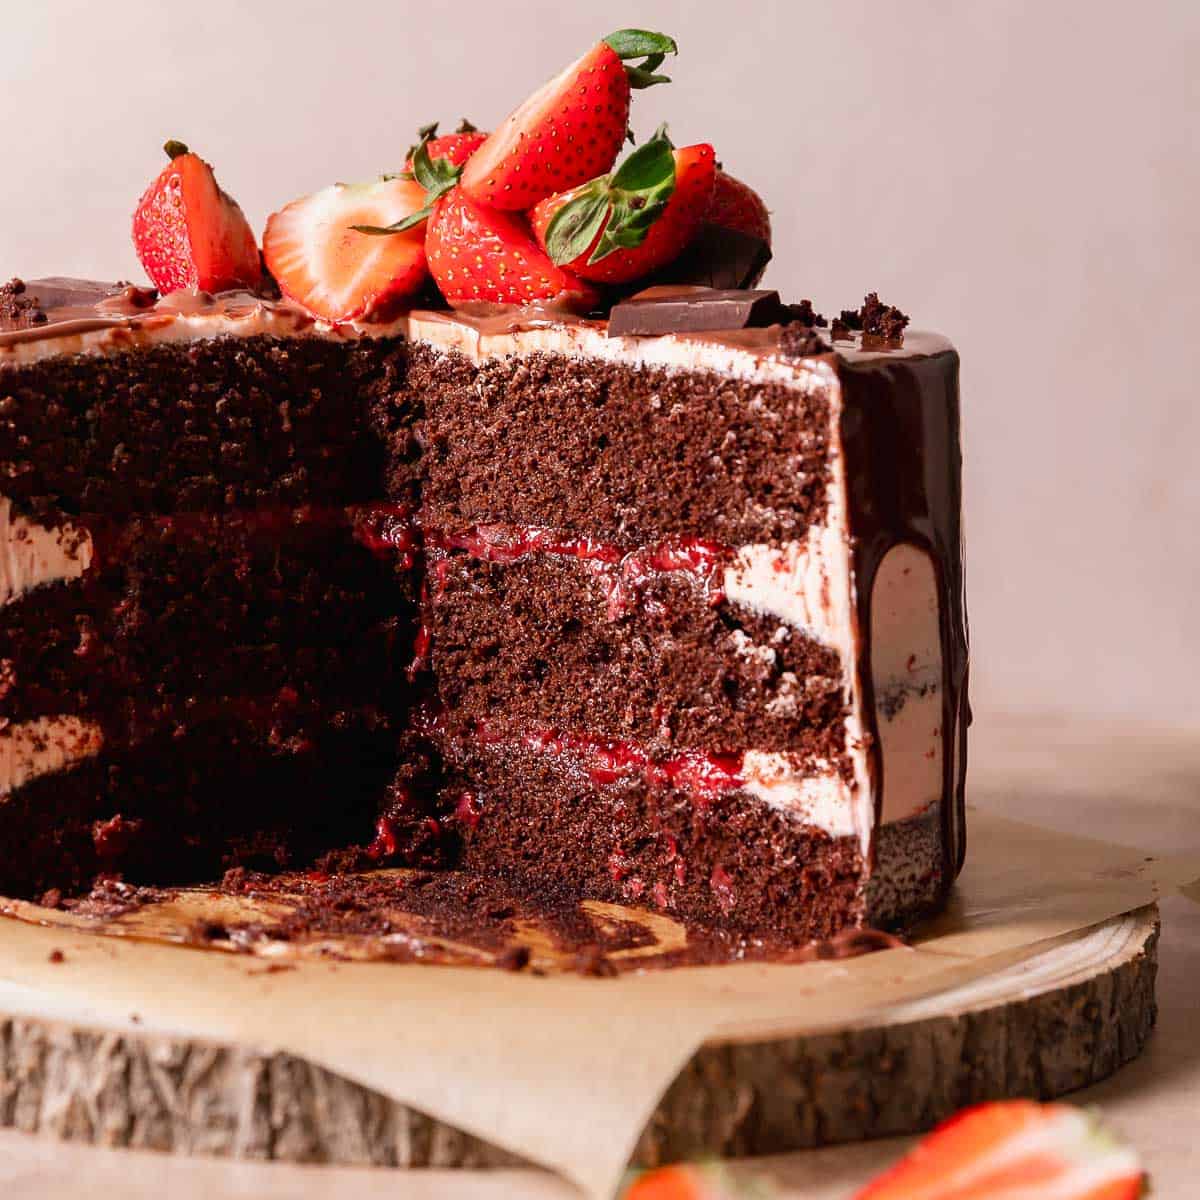 Chocolate cake with strawberry filling on a wooden cake stand.